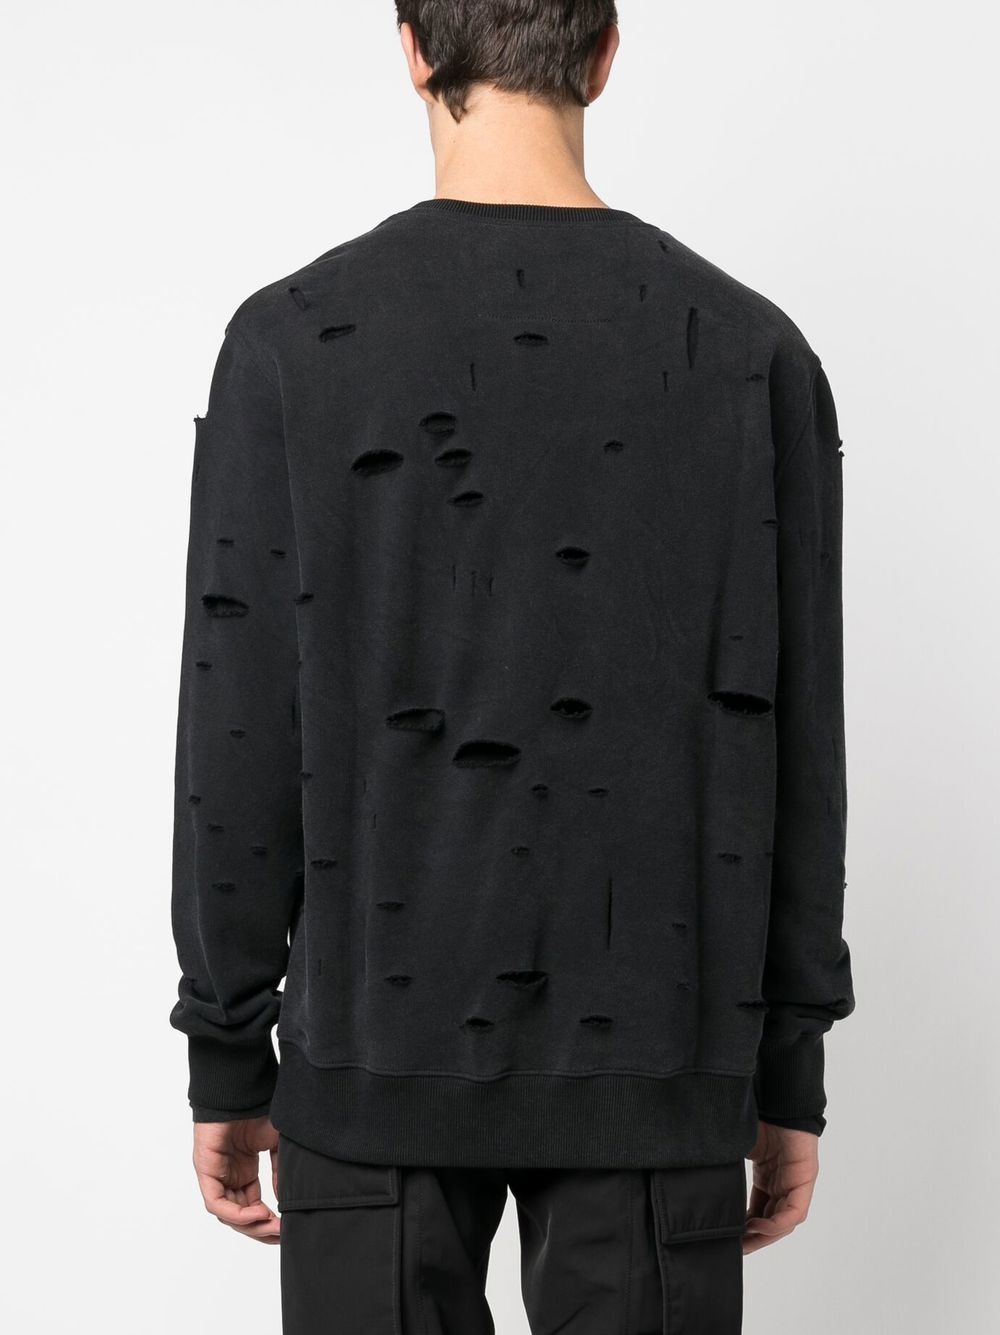 Givenchy Sweaters Black